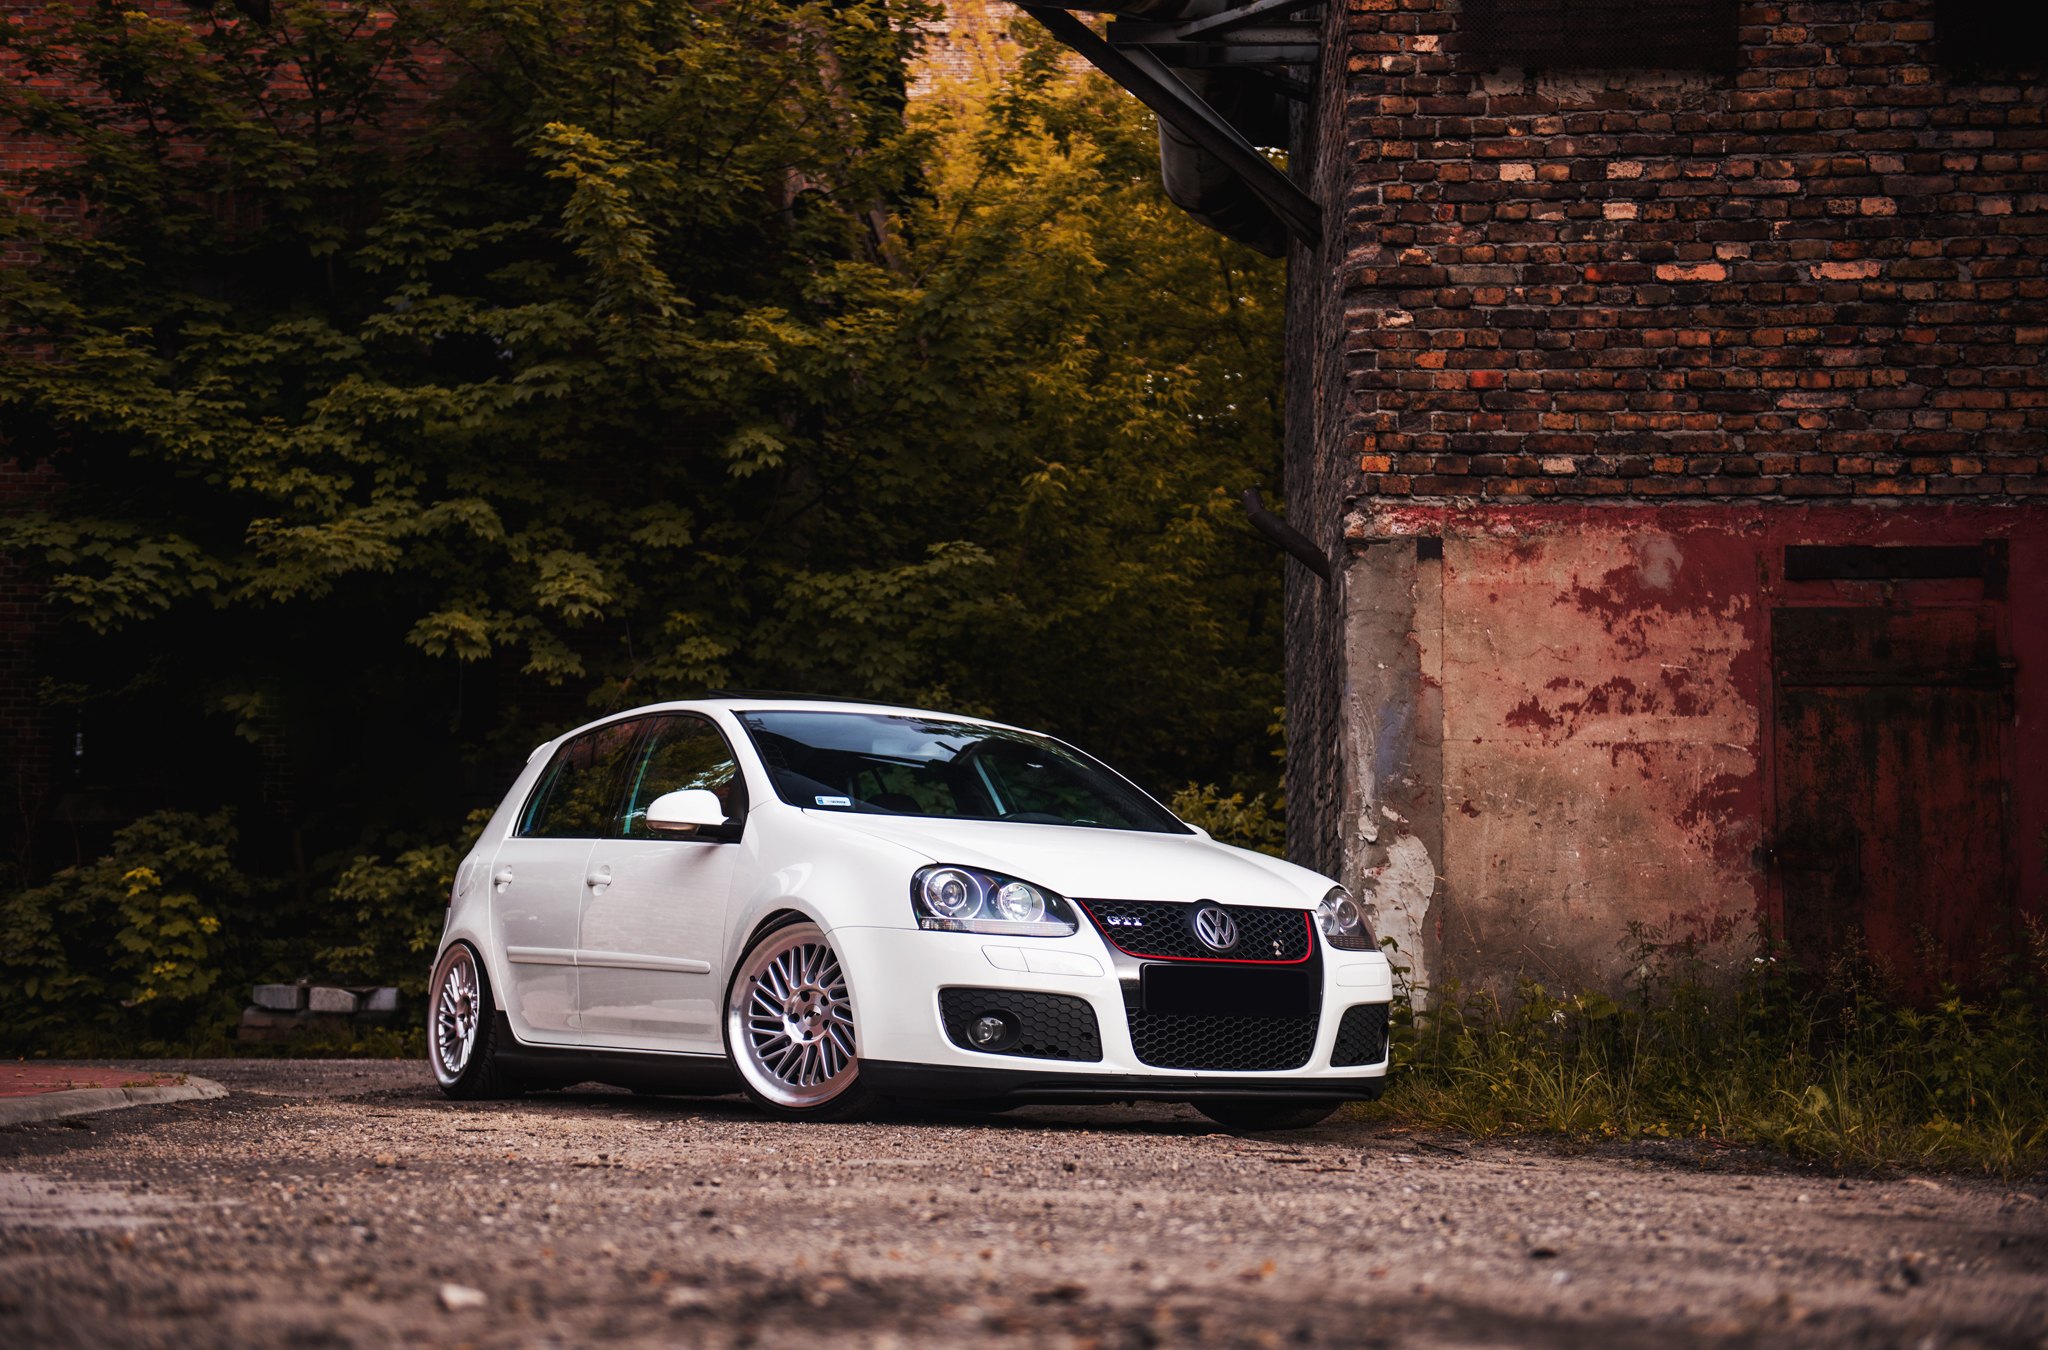 Front Bumper with Fog Lights on White VW Golf - Photo by JR Wheels